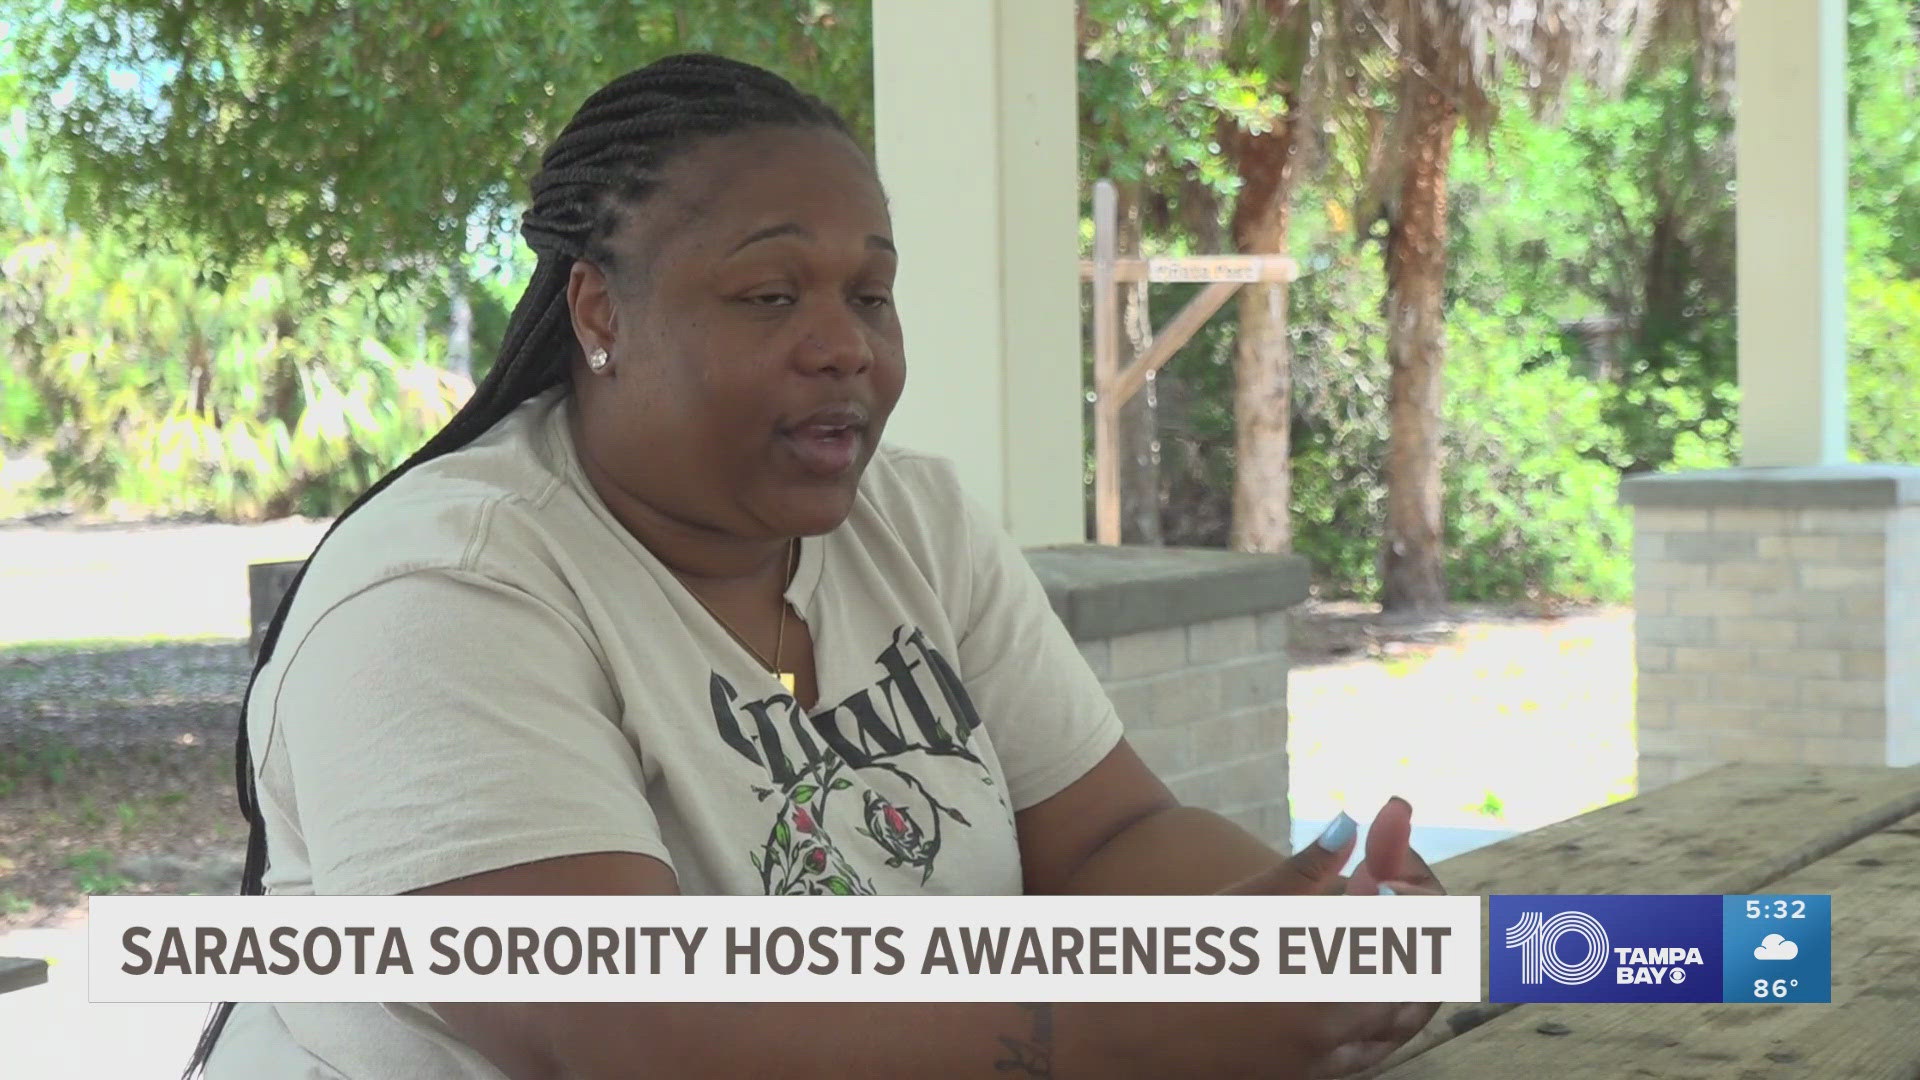 10 Tampa Bay reporter Adaure Achumba shares how a local sorority is partnering with advocacy groups to help survivors find their voice.